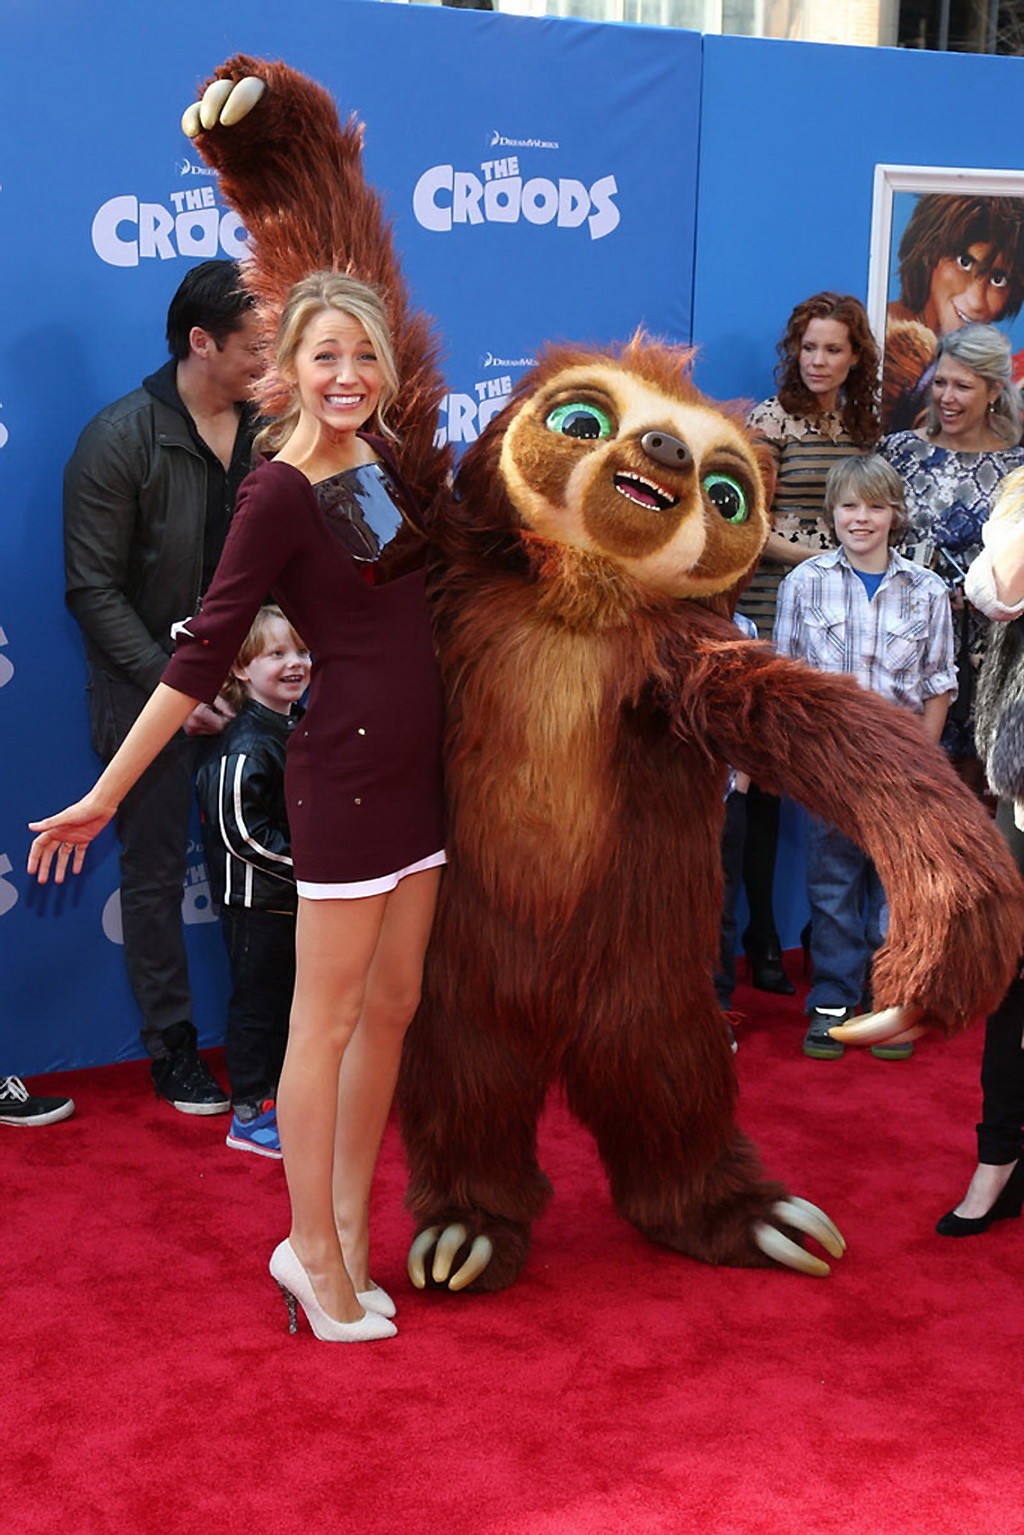 Blake Lively leggy wearing a mini dress at 'The Croods' premiere in NYC #75239151